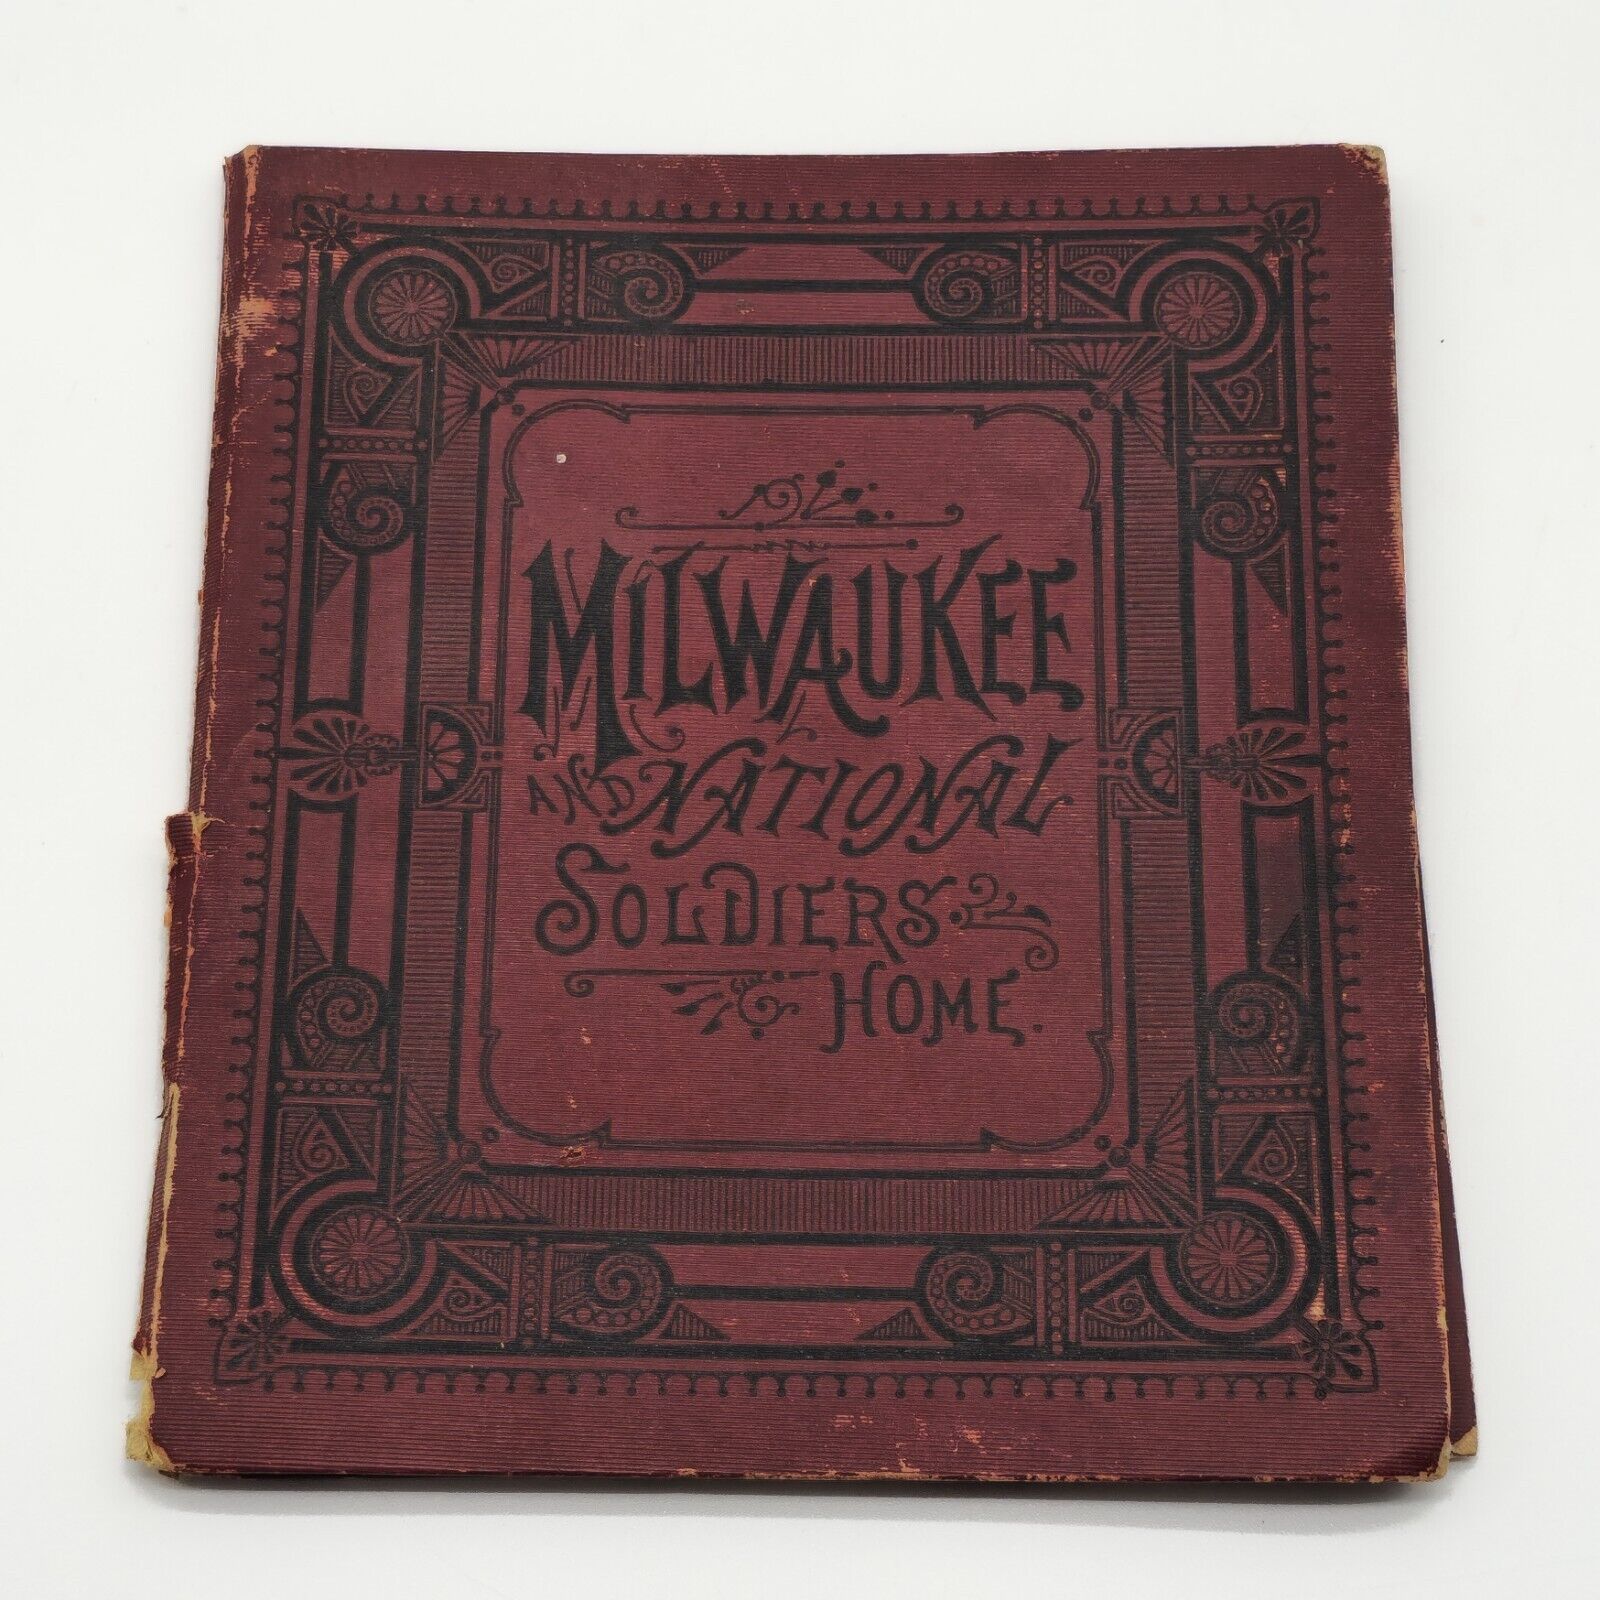 1889 Milwaukee and National Soldiers Home Fold Out Photo View Book